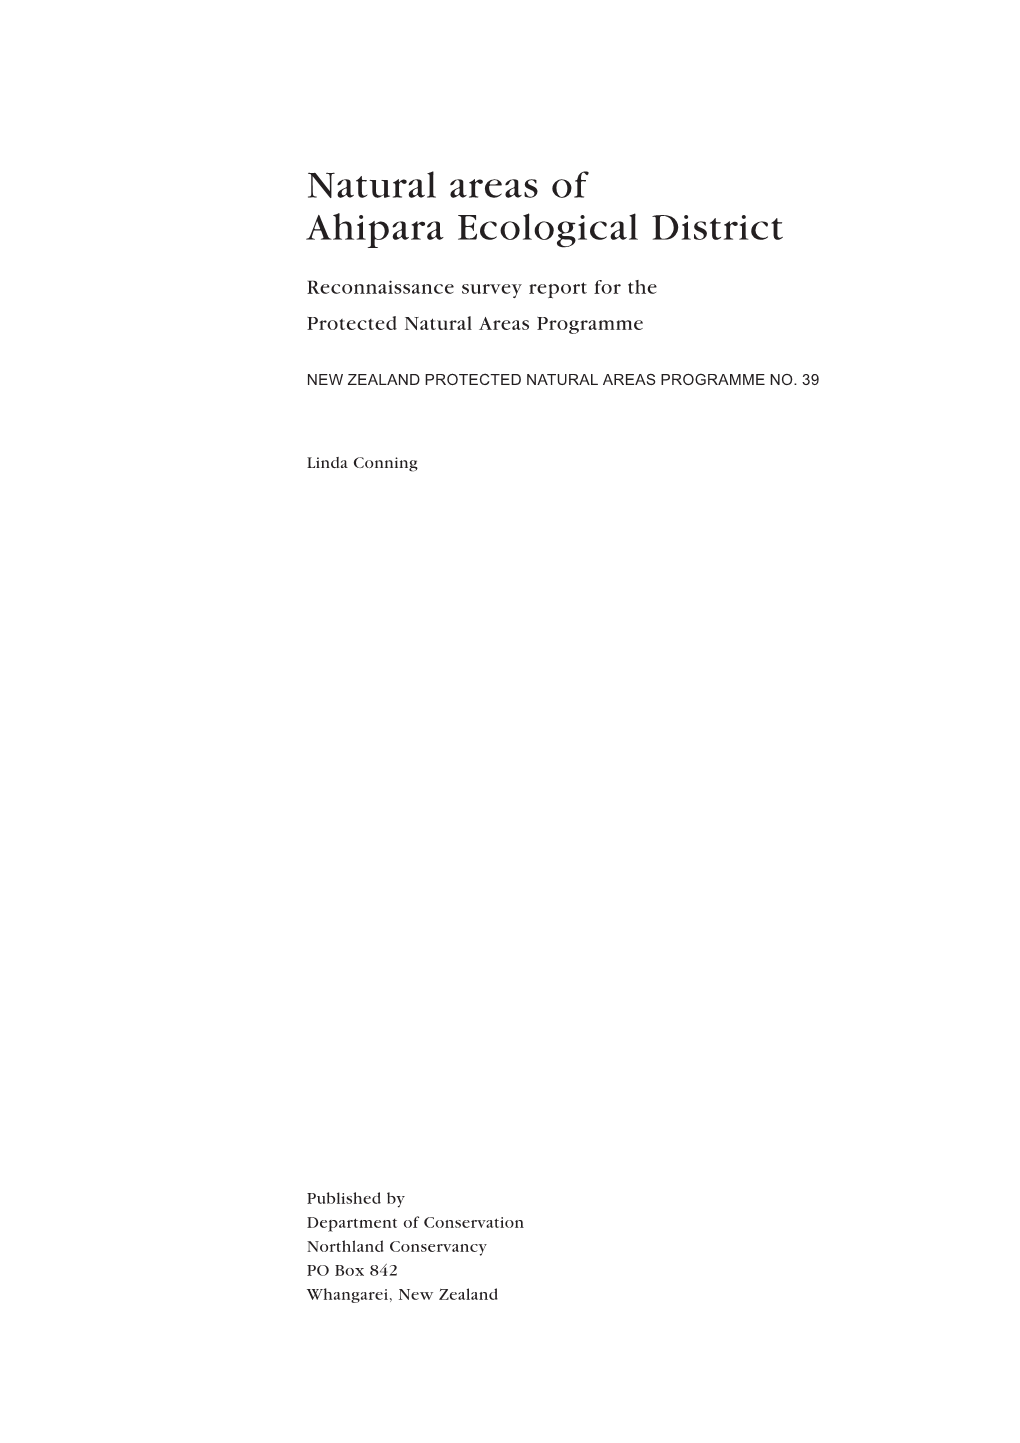 Natural Areas of Ahipara Ecological District